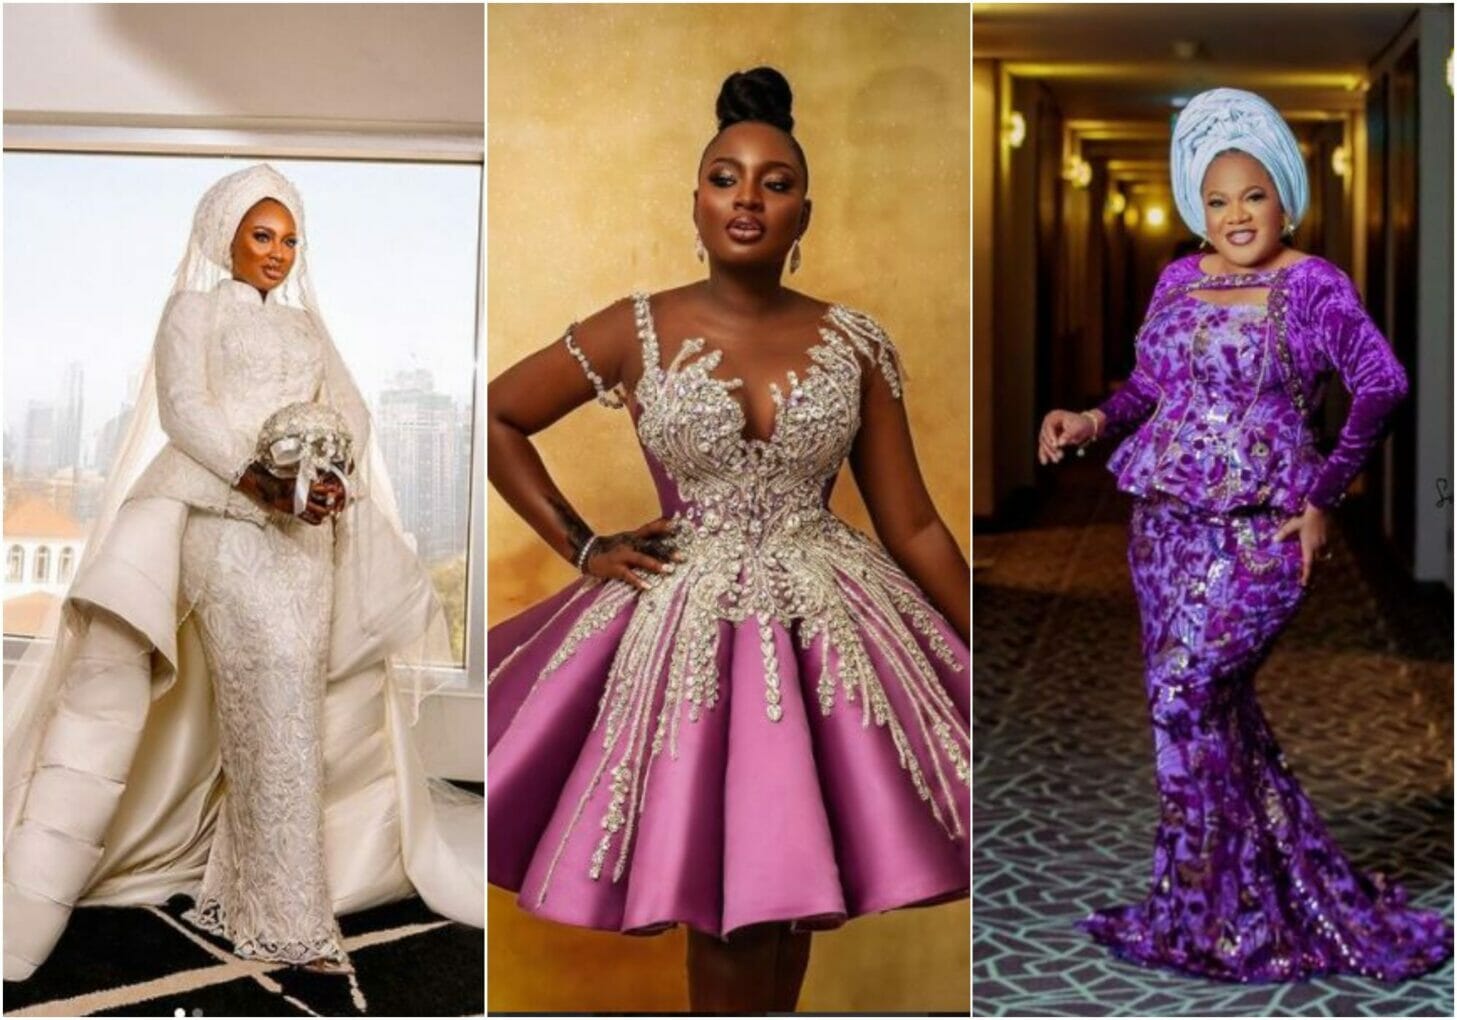 How Actress Toyin Abraham paid millions for Bimpe Oyebades wedding dresses.